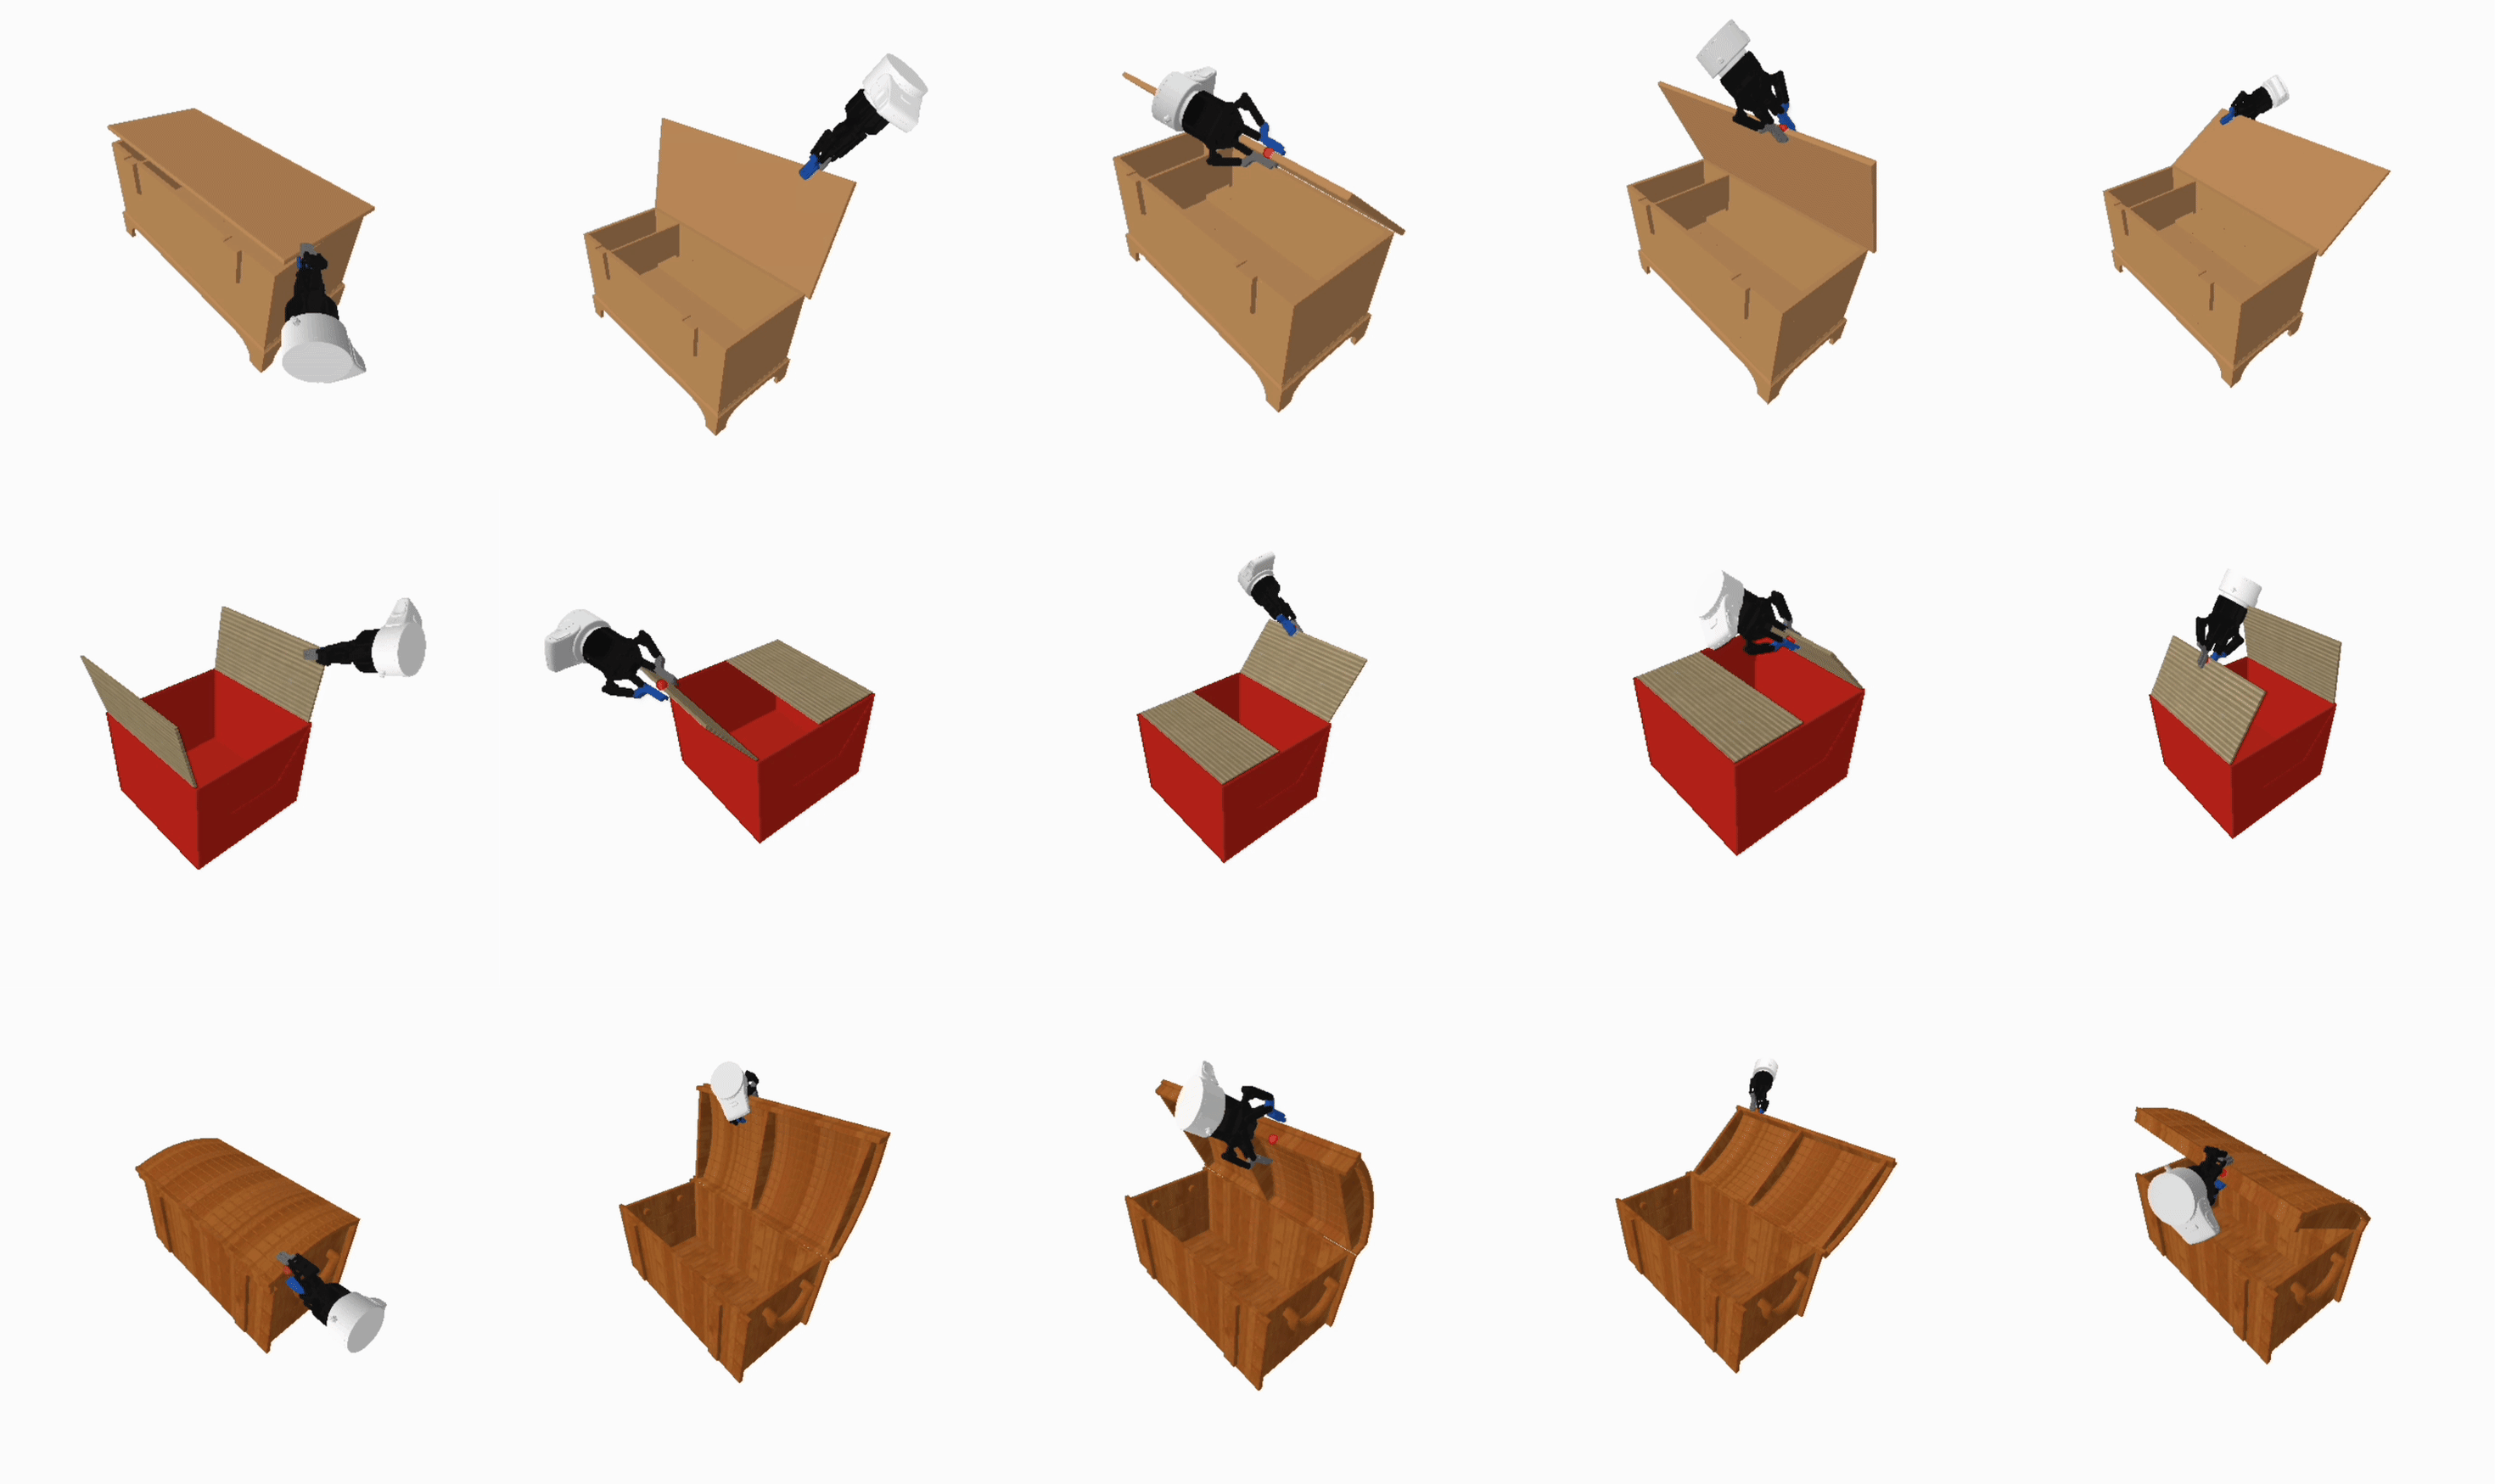 Grid with multiple grasp executions on boxes.